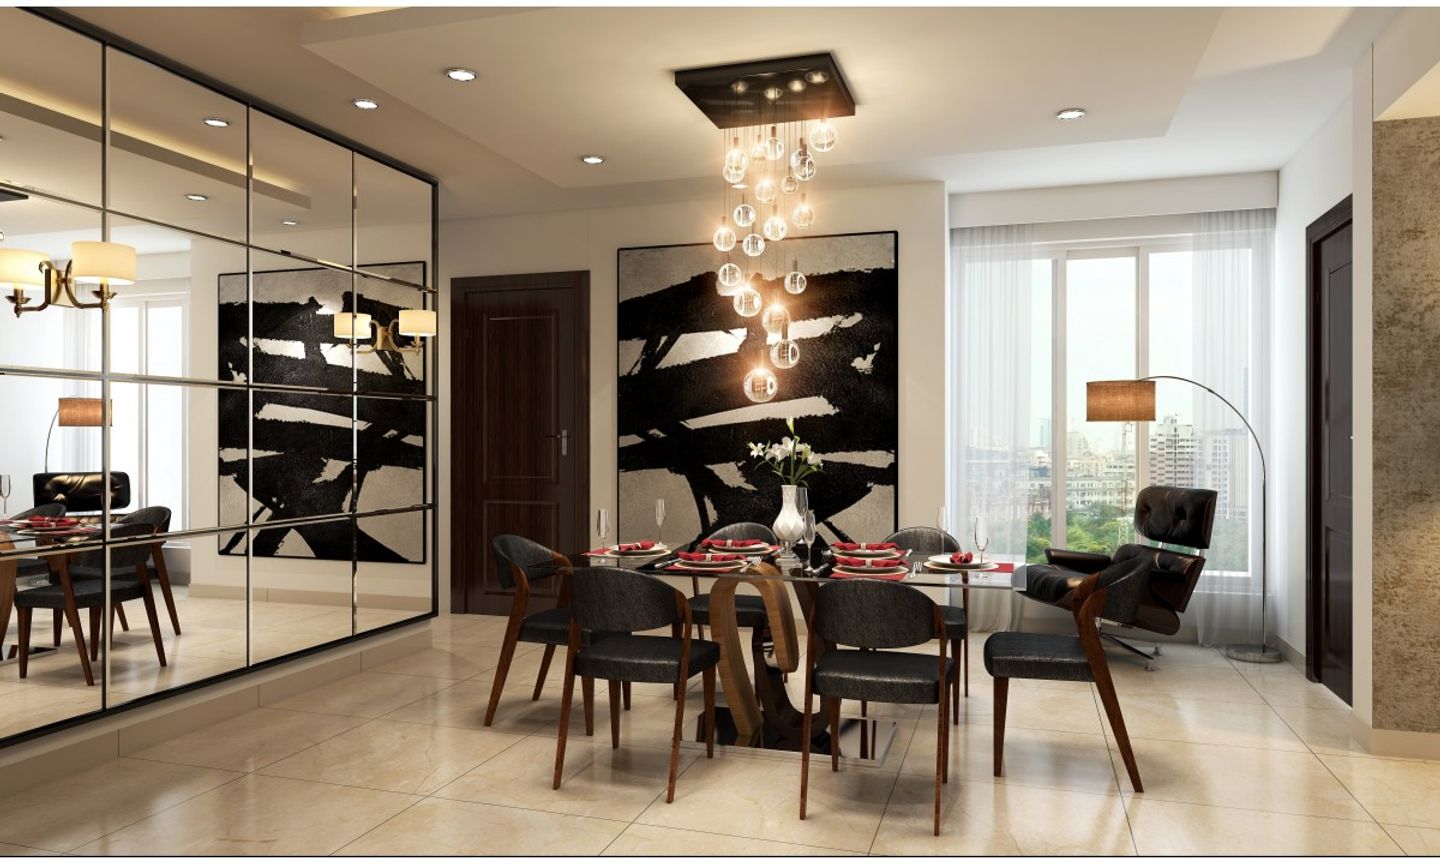 Modern 6-Seater Black And Wood Dining Room Design With Ornamental Chandelier